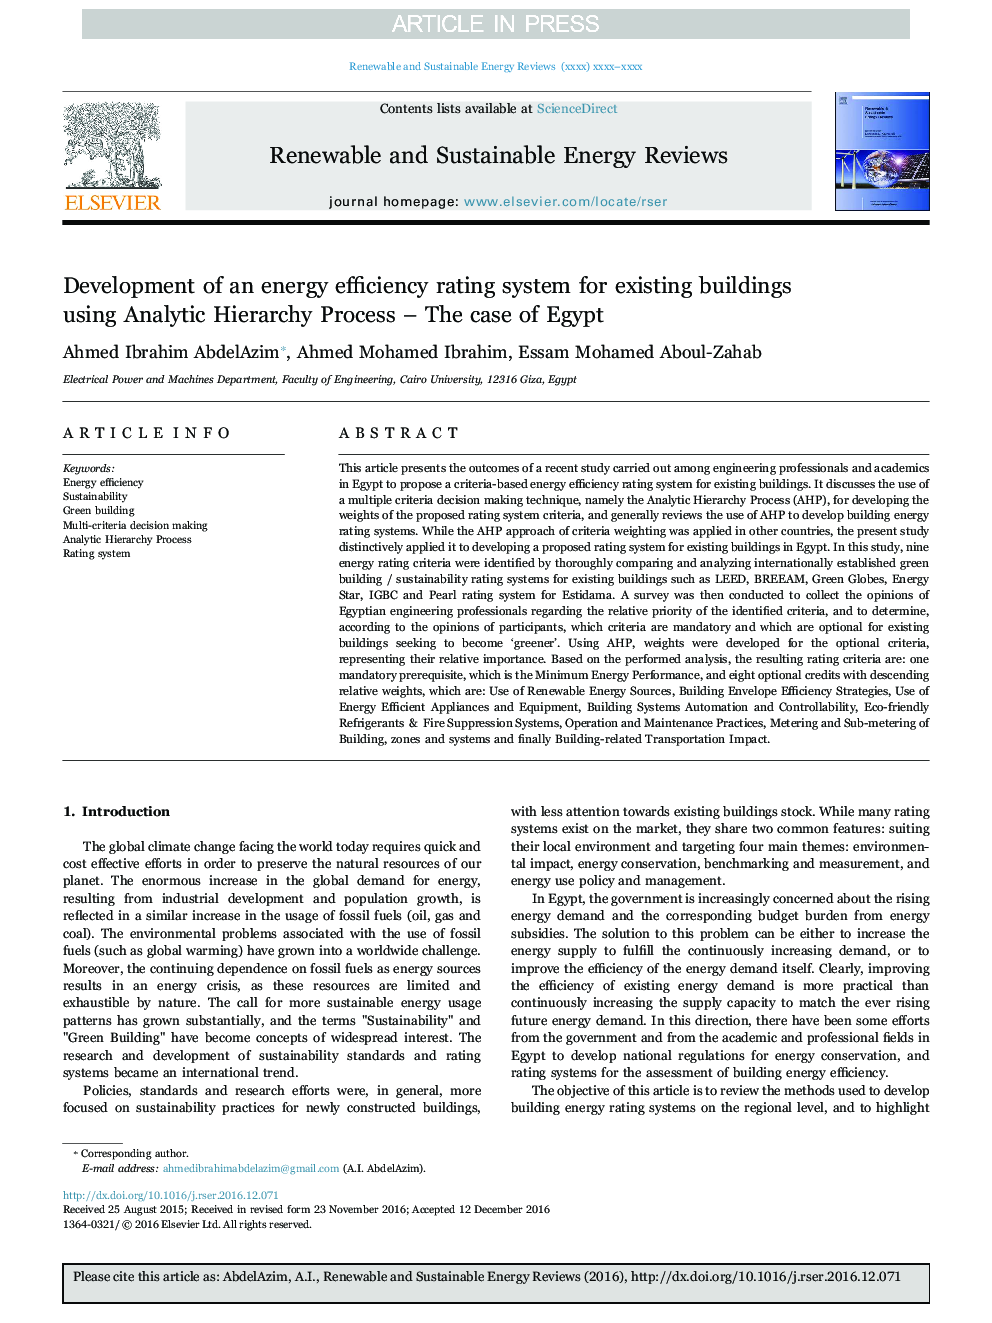 Development of an energy efficiency rating system for existing buildings using Analytic Hierarchy Process - The case of Egypt